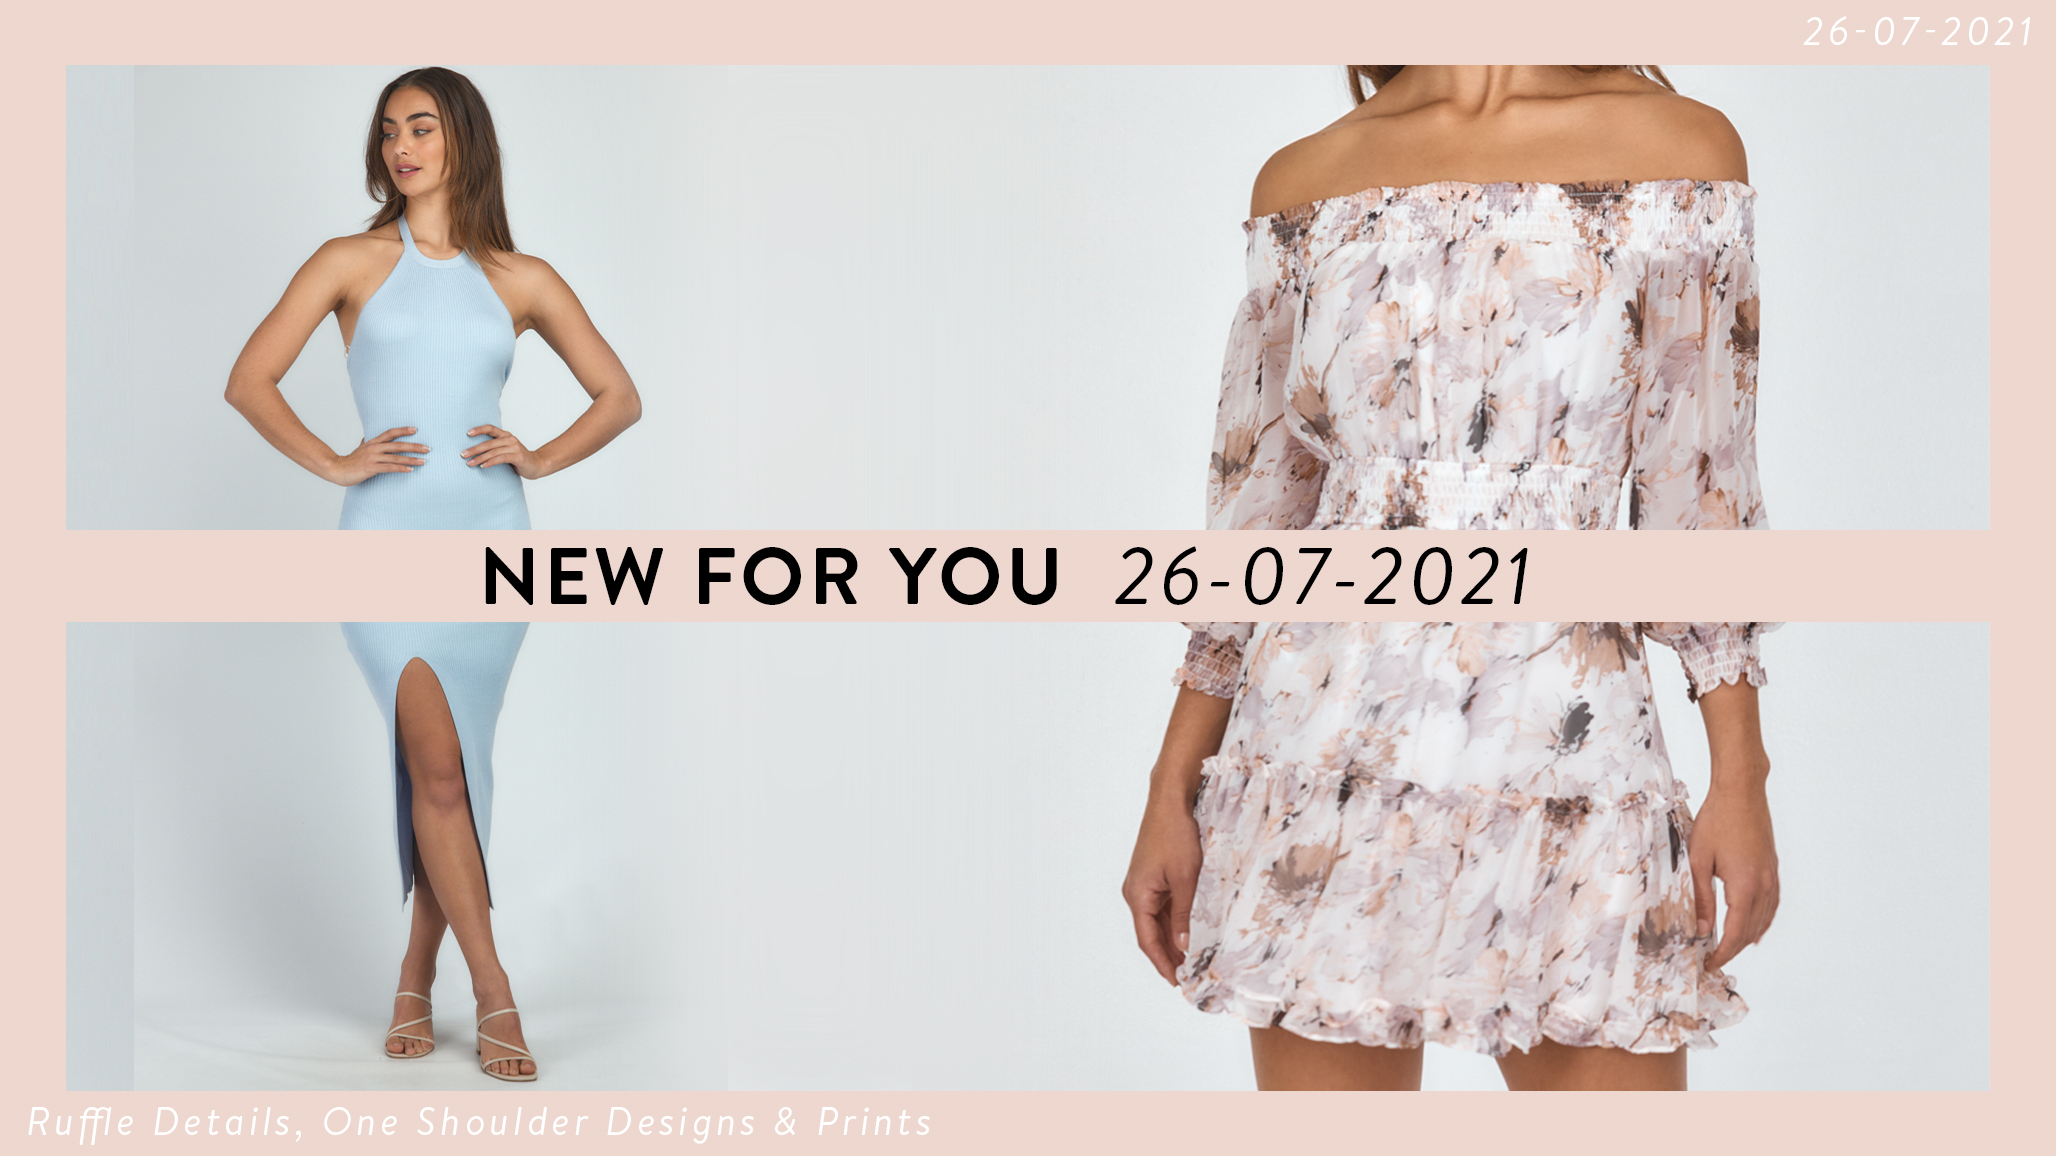 NEW FOR YOU 26.07.2021